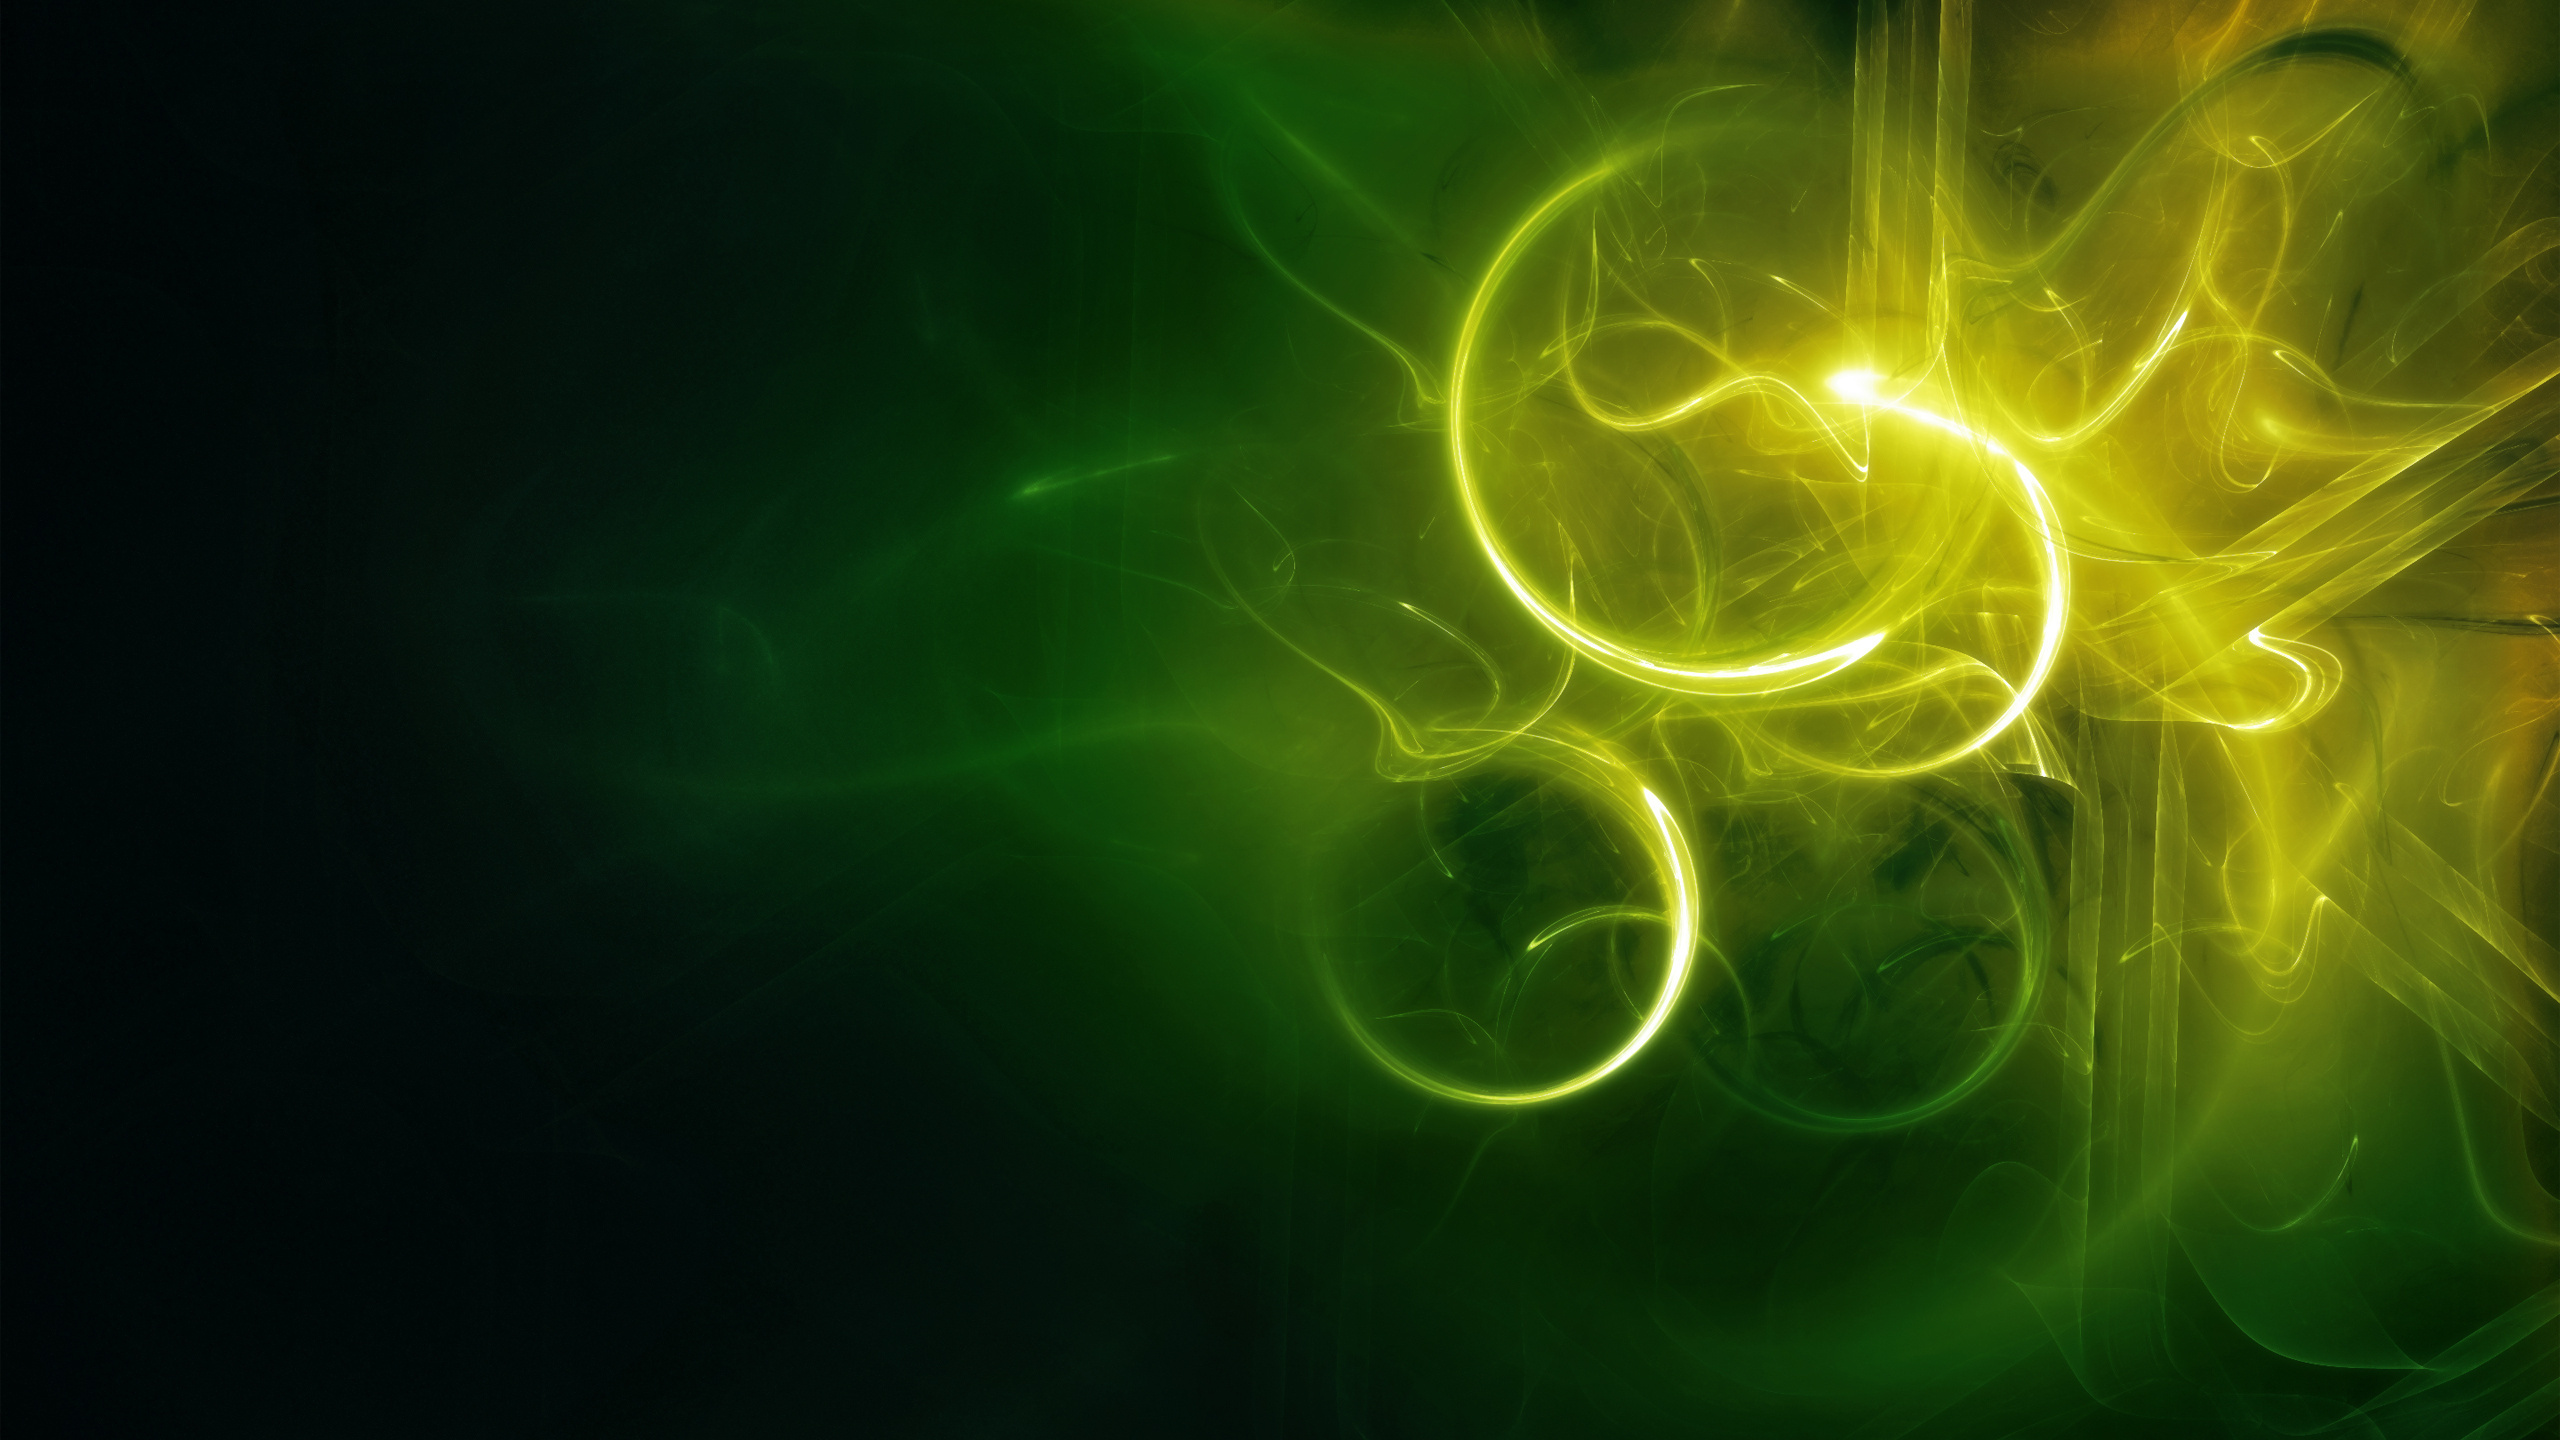 Green and Yellow Light Streaks. Wallpaper in 2560x1440 Resolution